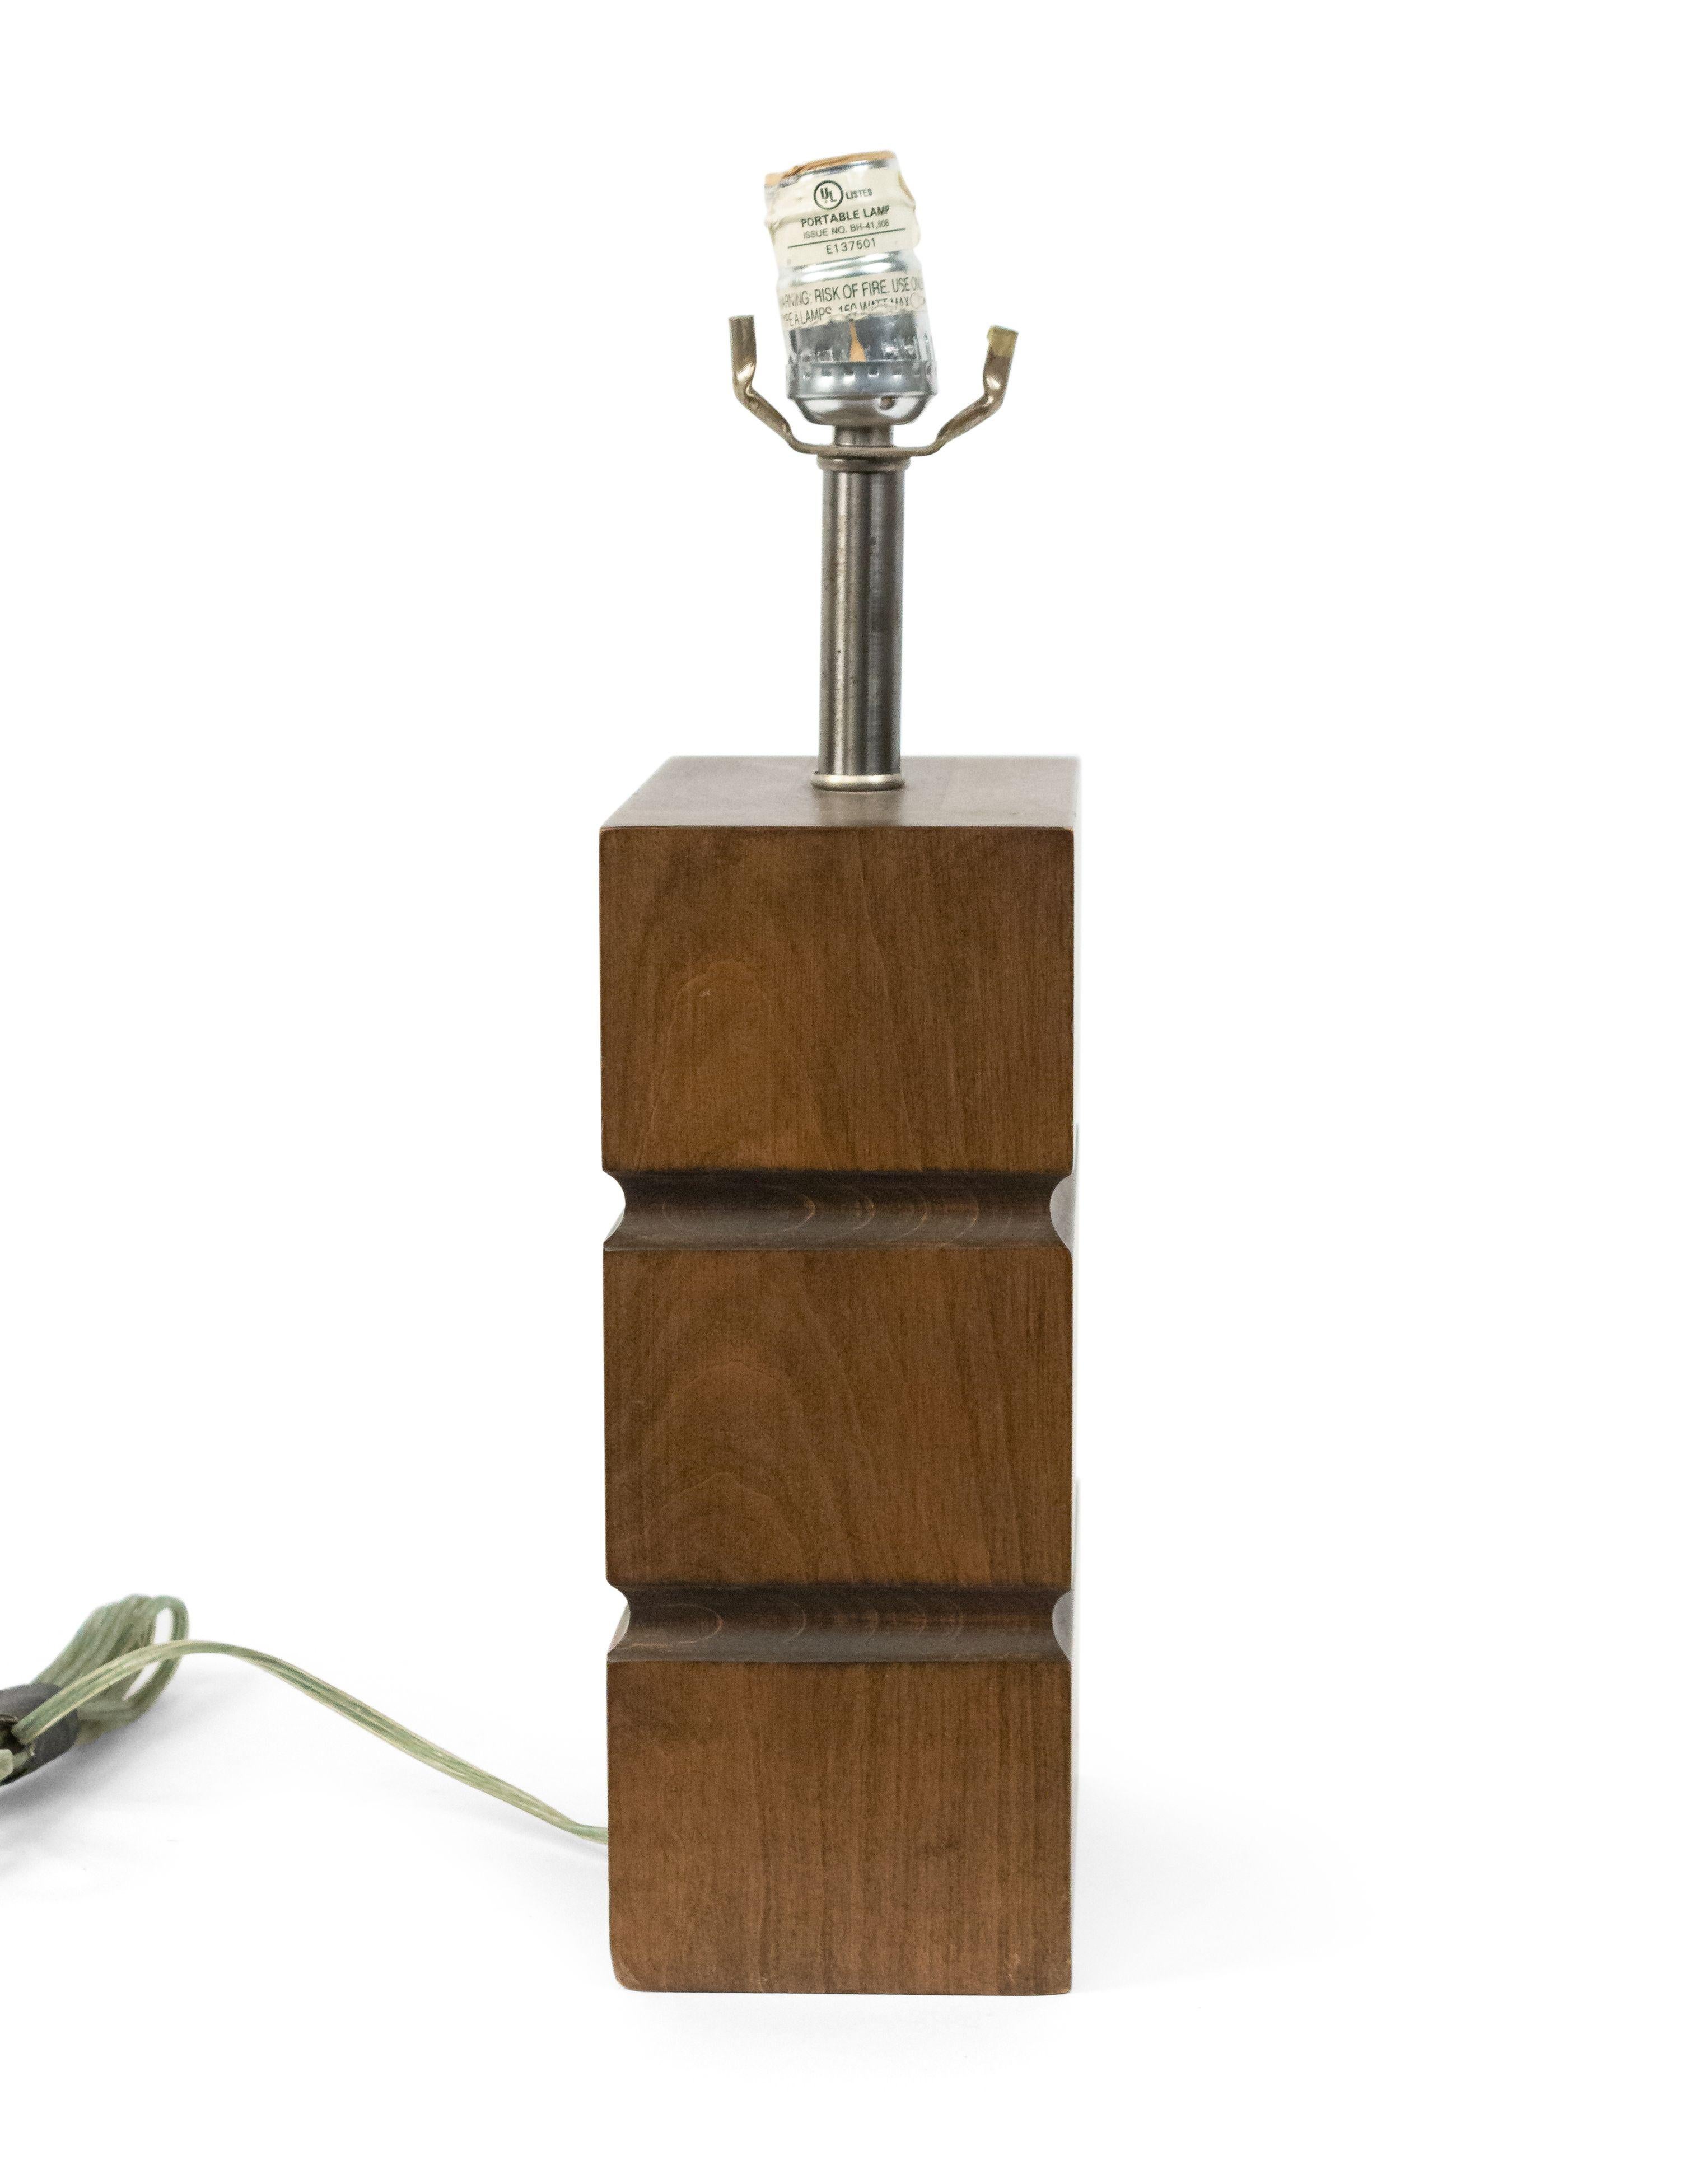 American Mid-Century Wood Block Table Lamp In Good Condition For Sale In New York, NY